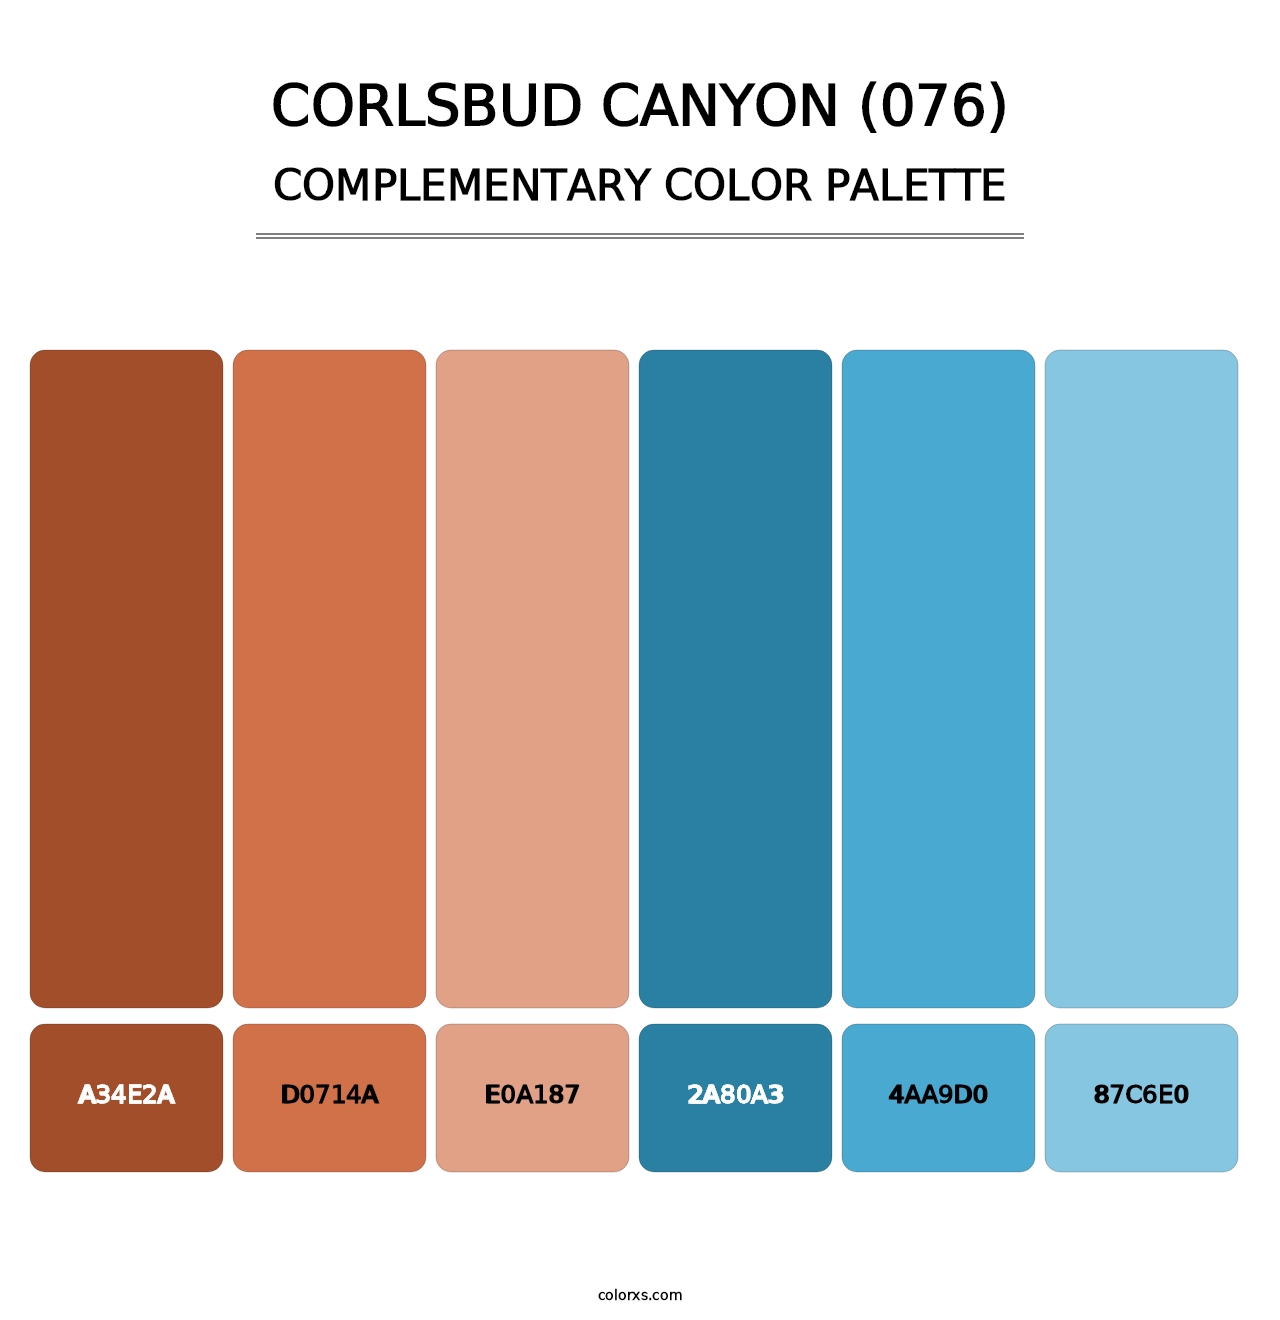 Corlsbud Canyon (076) - Complementary Color Palette